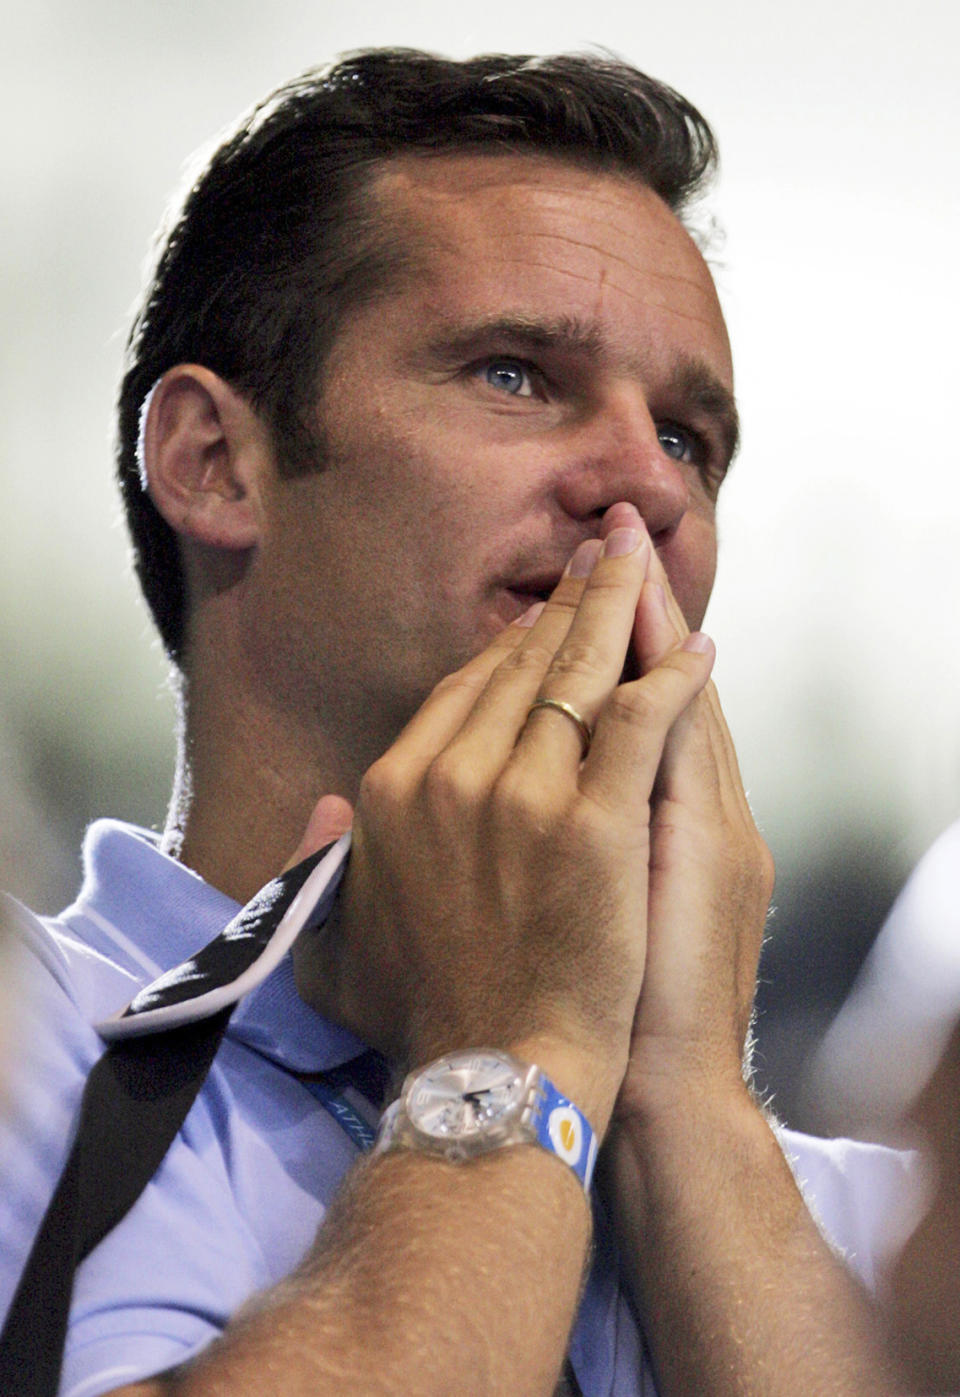 FILE - In this Aug. 20, 2004 file photo Spain's Duke of Palma Inaki Urdangarin and husband of Spain's Princess Cristina reacts while watching a handball match in Athens. Urdangarin, the Spanish king's son-in-law and husband of Princess Cristina will undergo interrogation over alleged corruption Saturday Feb. 25, 2012 in Palma de Mallorca. Although the case file against him remains sealed, much has been leaked and Urdangarin is suspected of using his high-profile position to win contracts from regional governments for a non-profit foundation he ran, then subcontract the work to for-profit companies he also ran, sometimes charging the governments ridiculously inflated prices and stashing at least some of the income in overseas tax havens. The king has dropped Urdangarin like a hot potato, announcing in December his son-in-law would no longer take part in official ceremonies with the rest of the family. (AP Photo/Andrew Medichini, File)